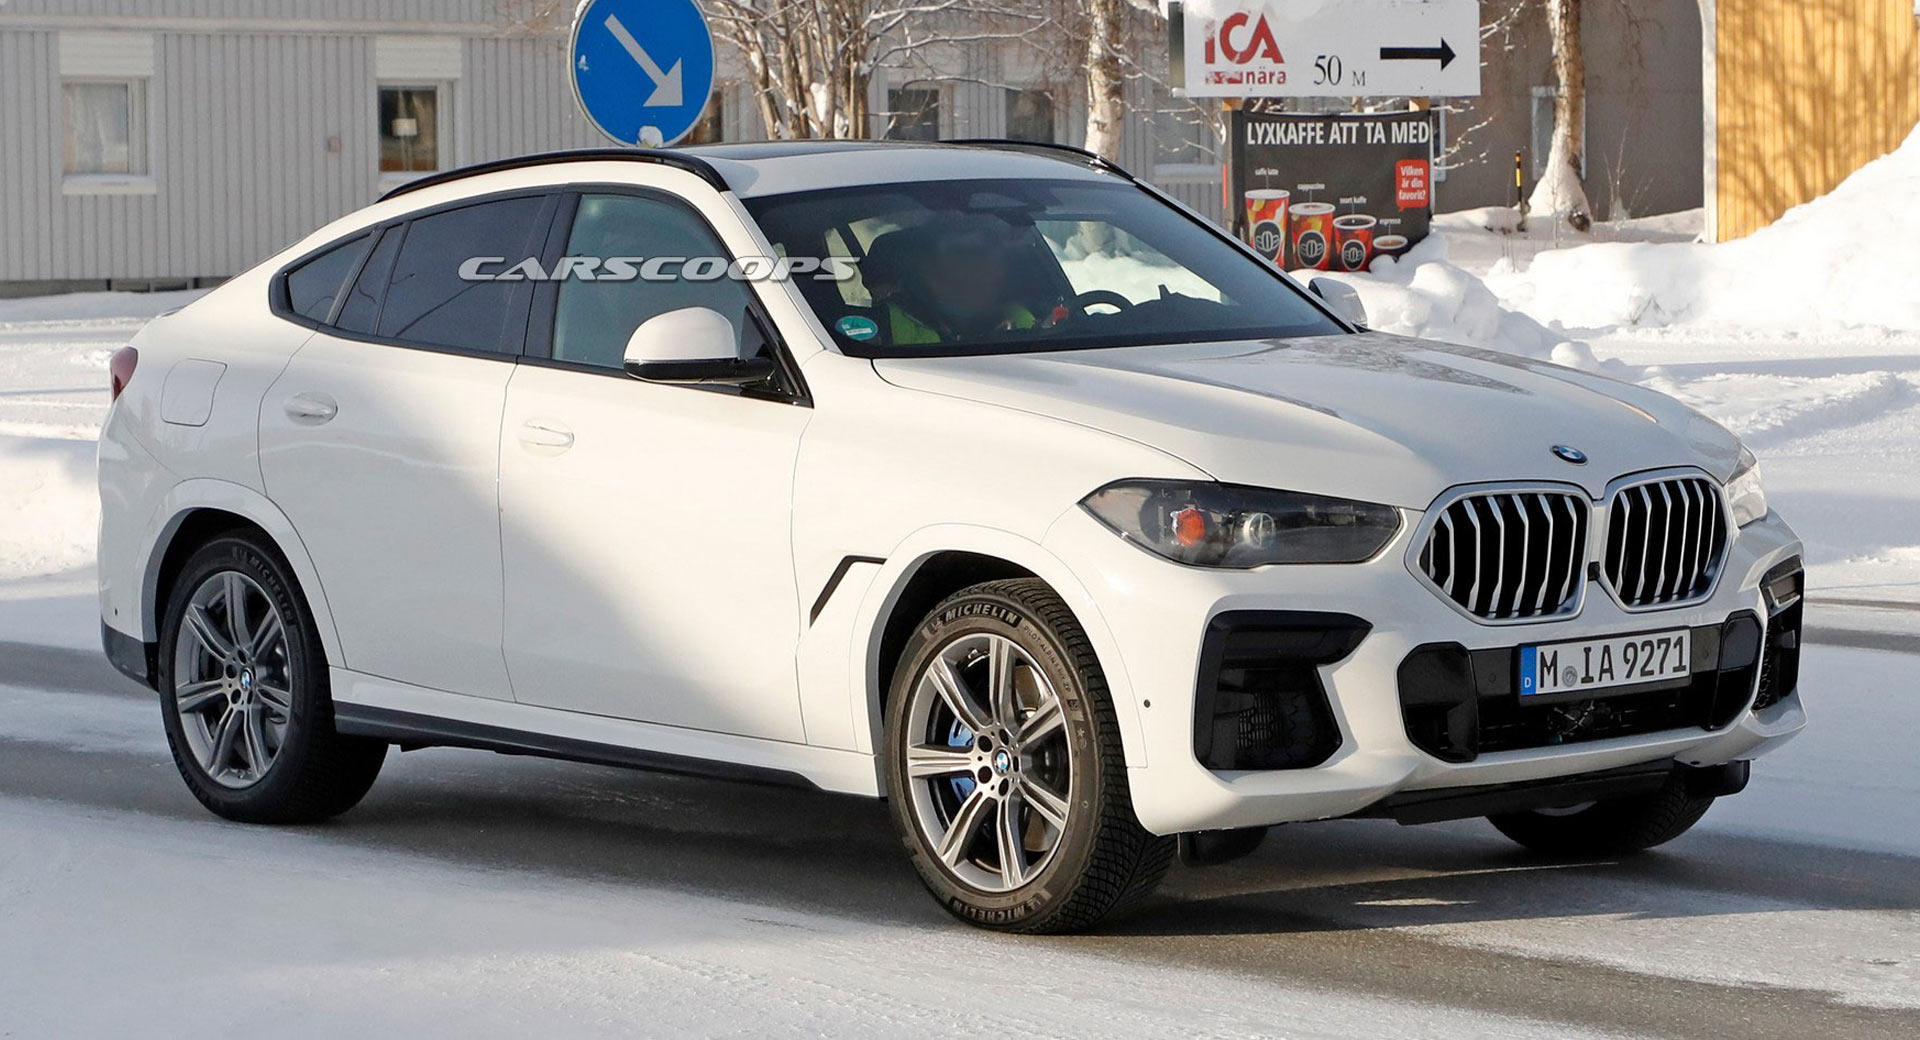 BMW X6 Facelift Spied With An iX-Like Curved Display | Carscoops